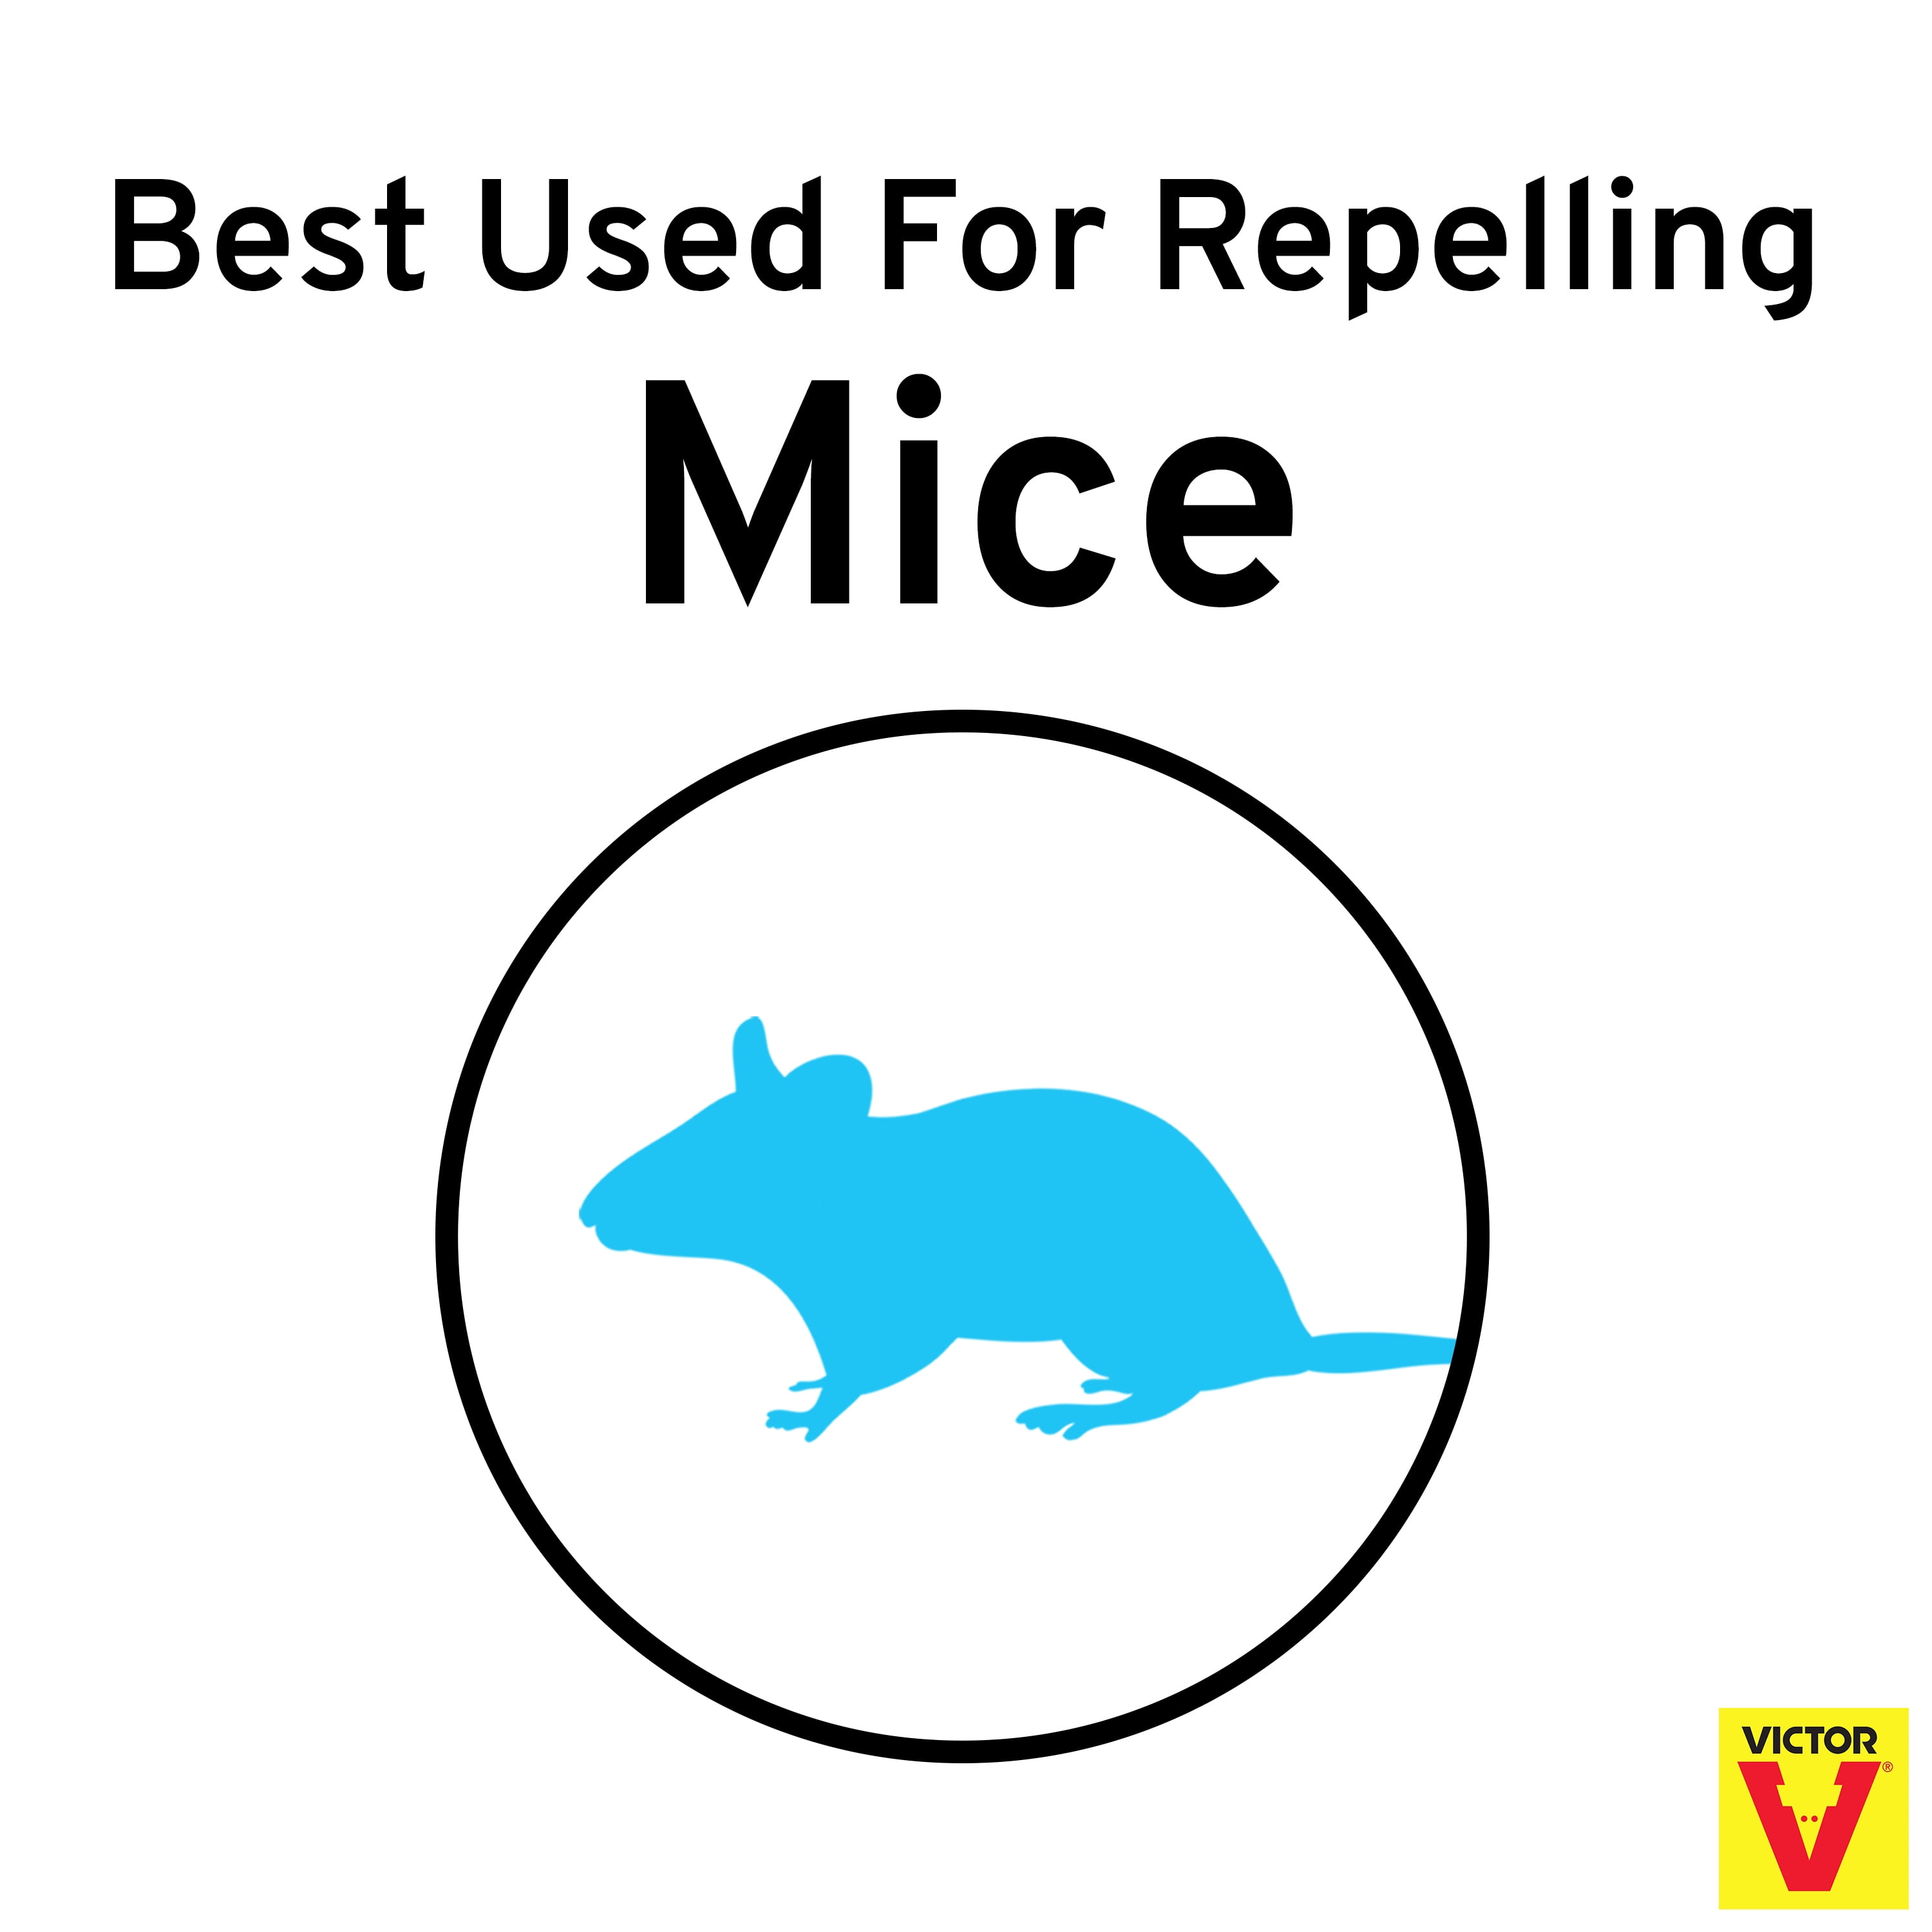 Victor M925 Ready-to-Use Rodent Poison Killer - Kills Rats, Mice, and  Meadow Voles, Yellow